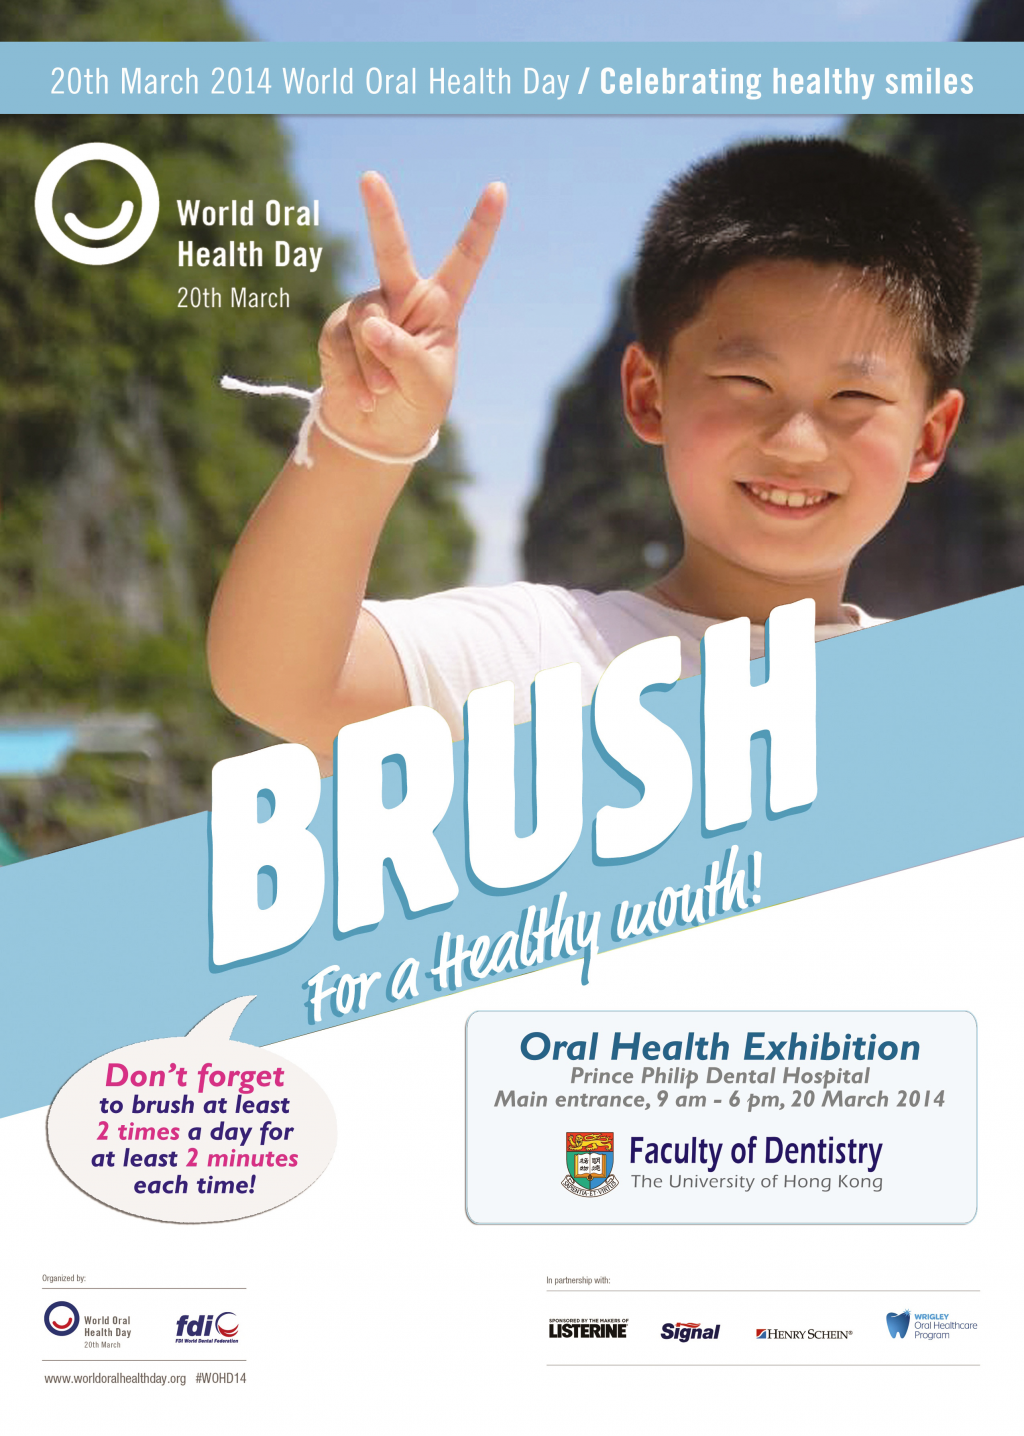 Dental Faculty “Oral Health Exhibition” for World Oral Health Day